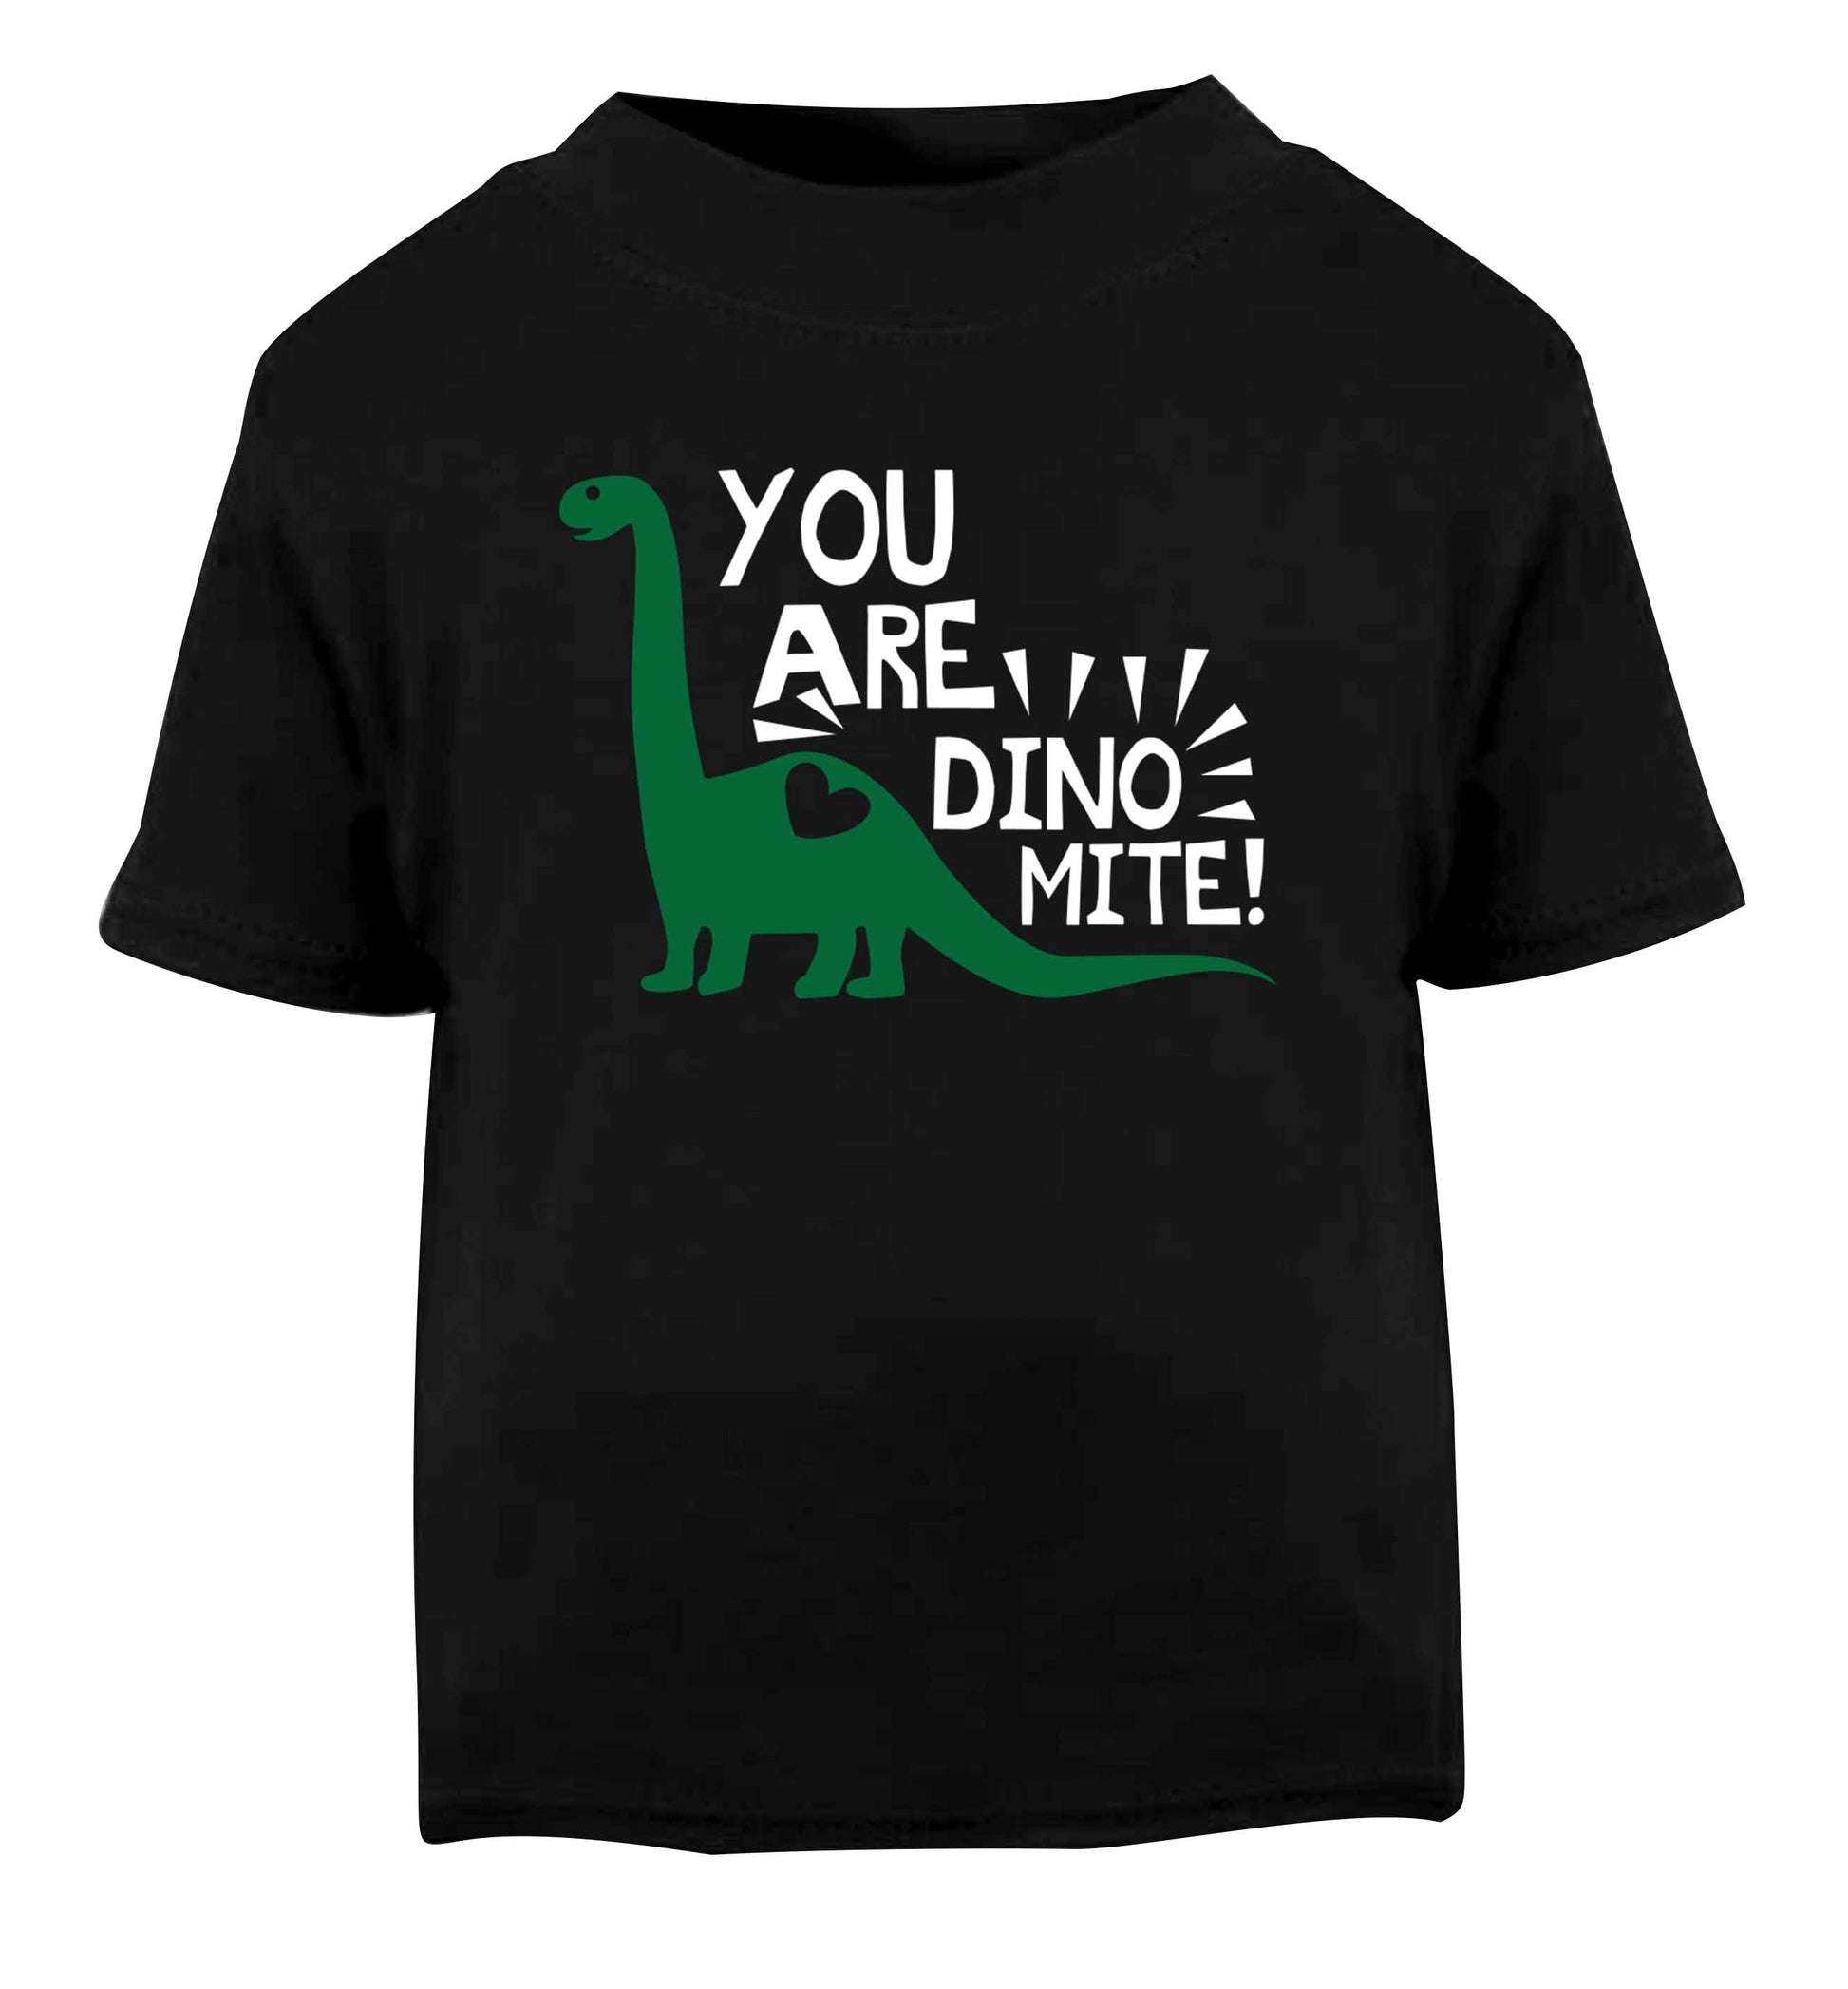 You are dinomite! Black Baby Toddler Tshirt 2 years